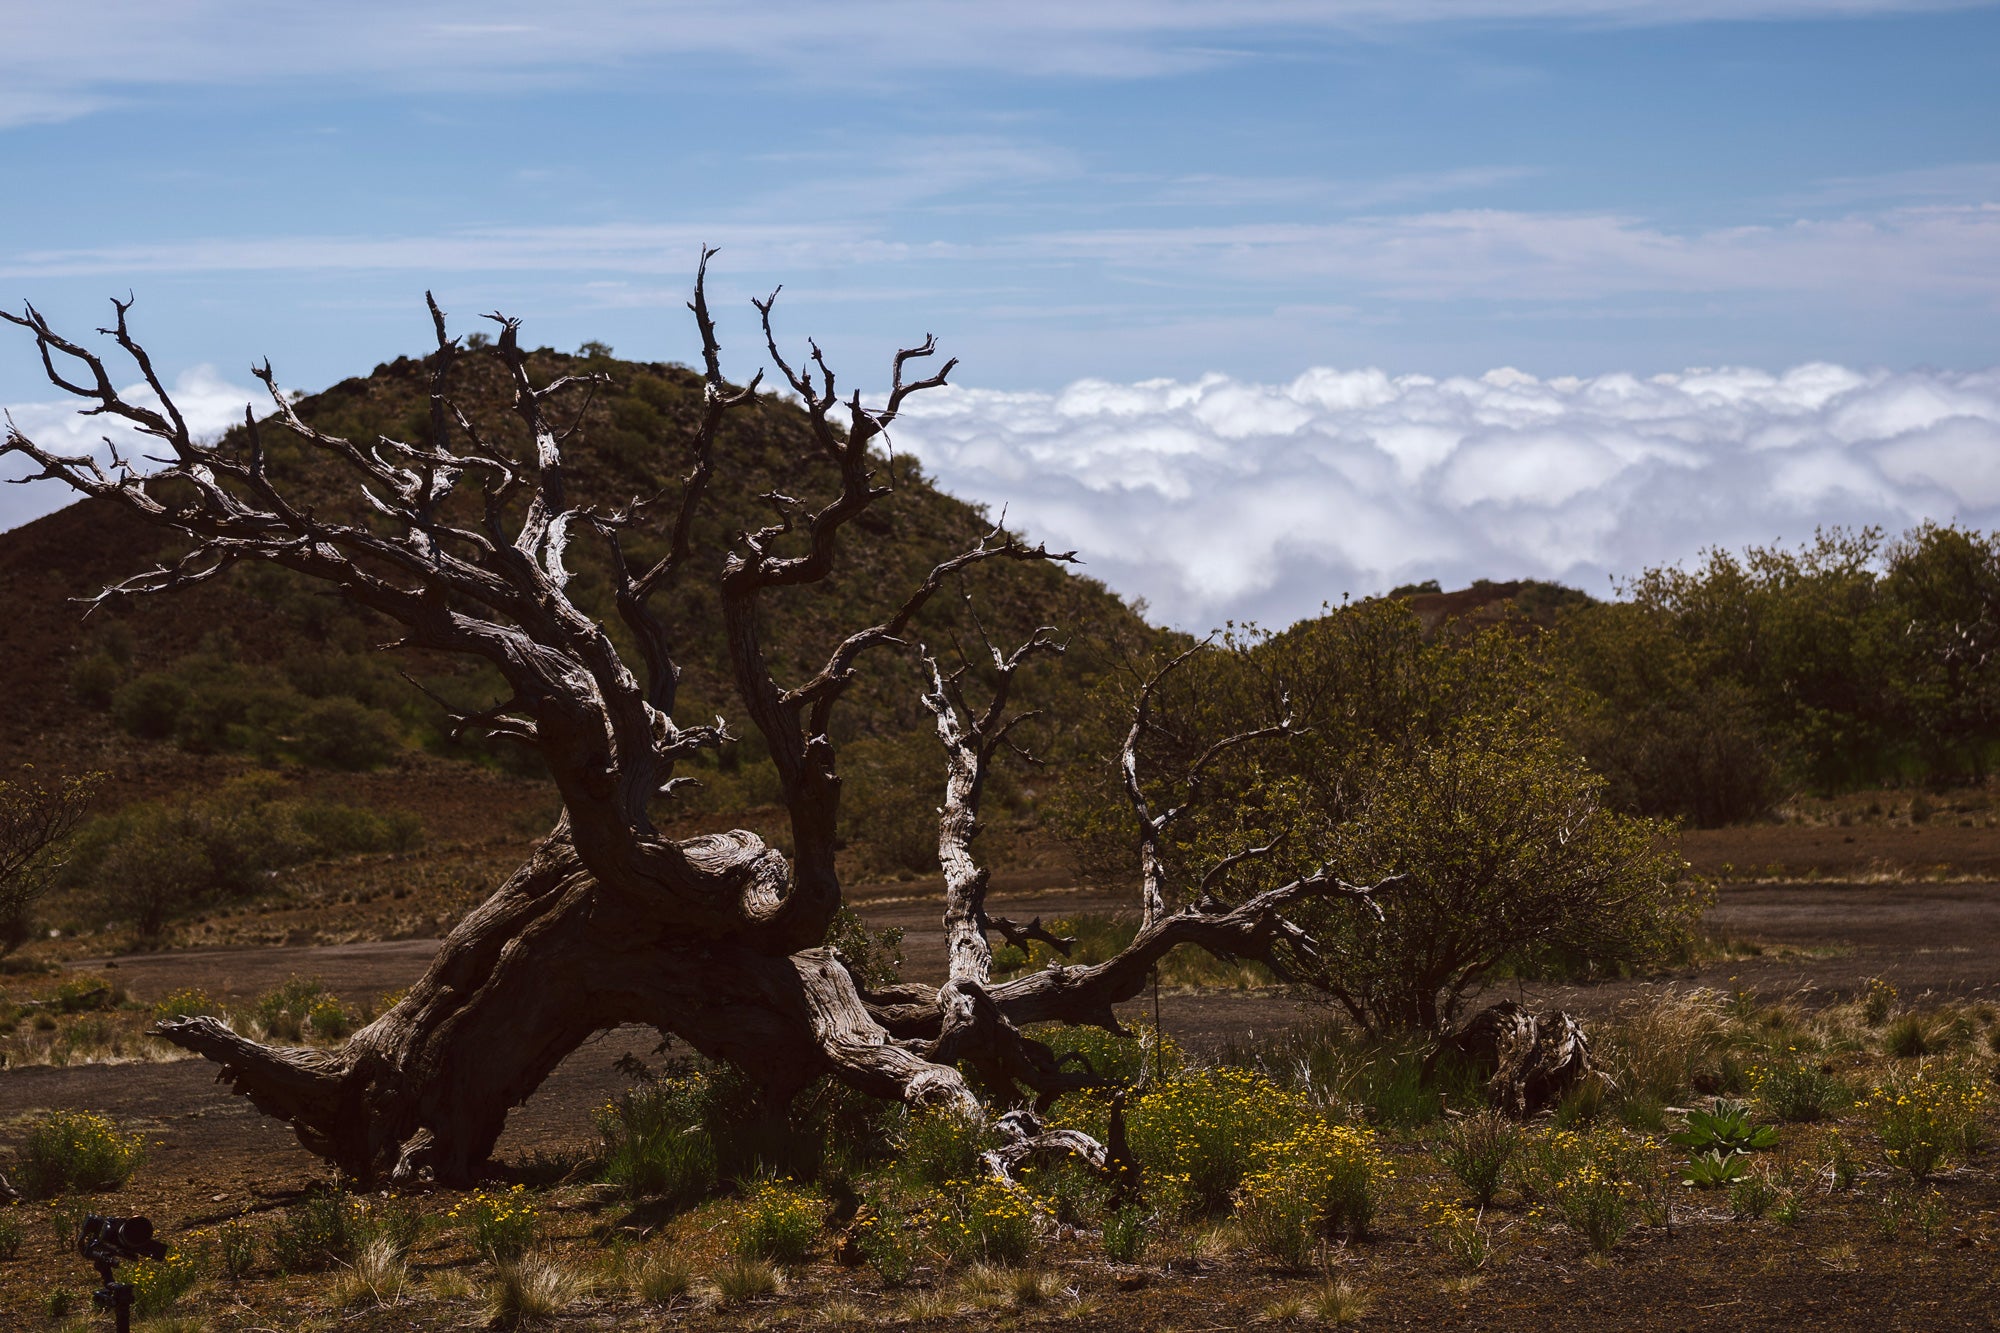 Hawaii Island landscape with dead tree in the foreground, barren hills in the background above the clouds in the background